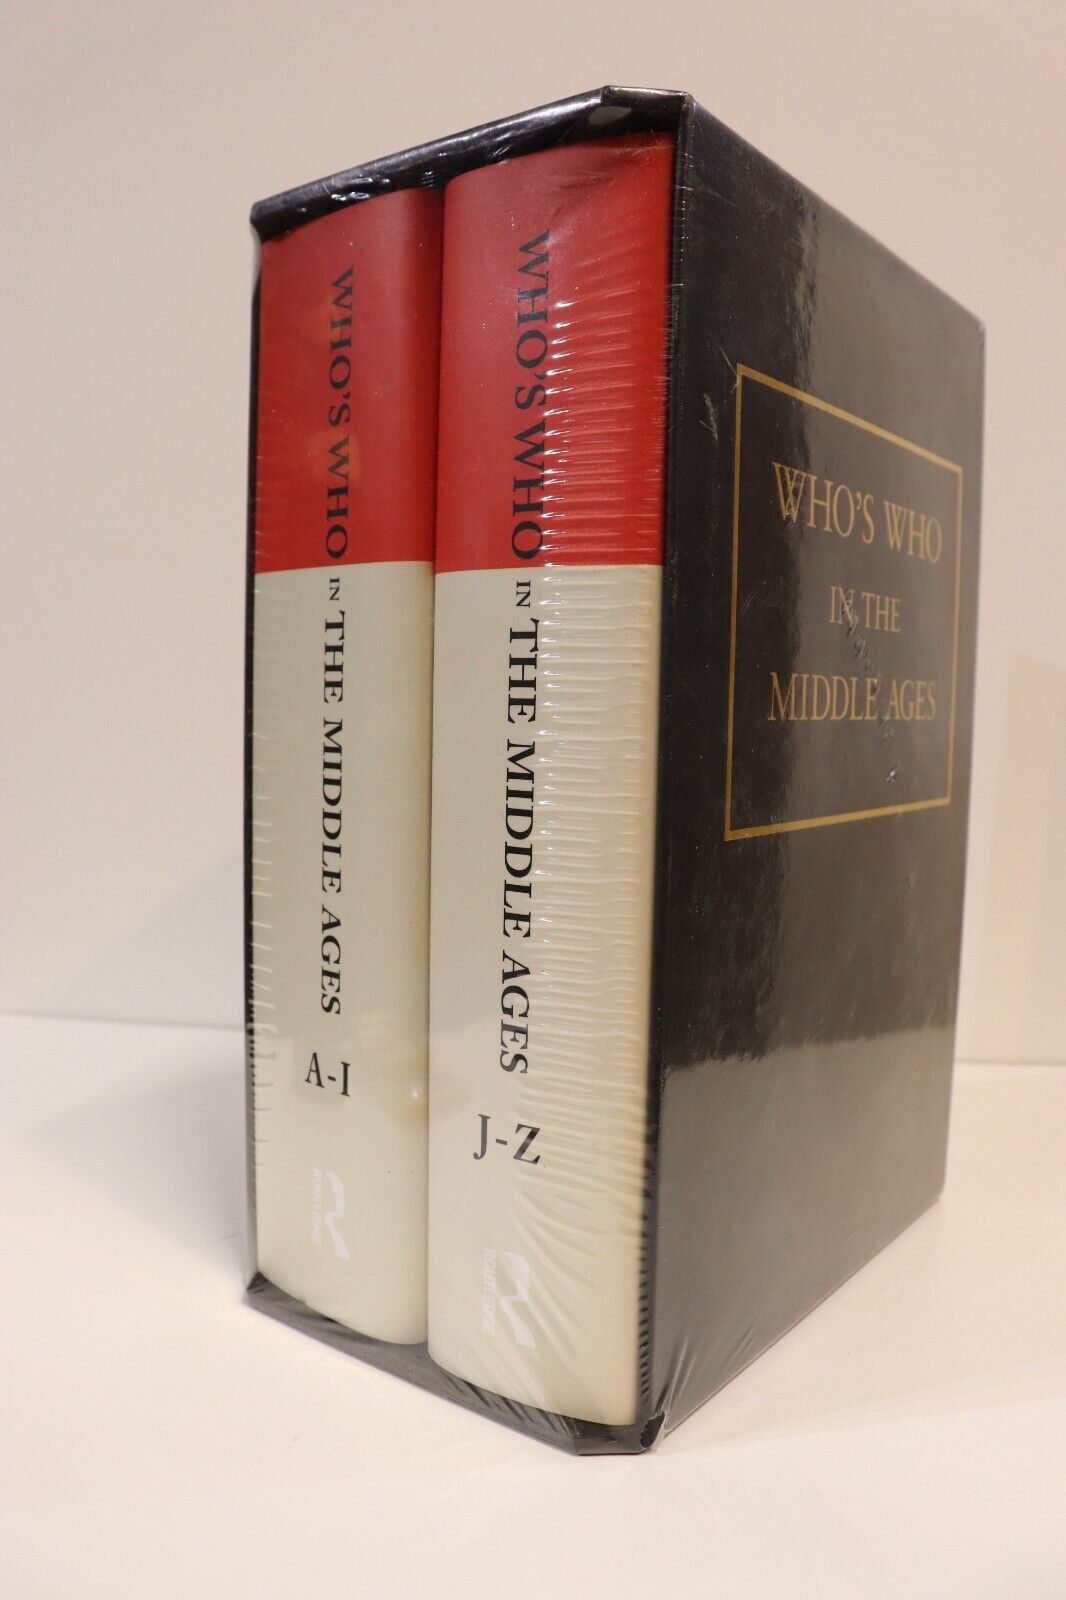 Who's Who In The Middle Ages - 2006 - Routledge - 2 Volume Book Set